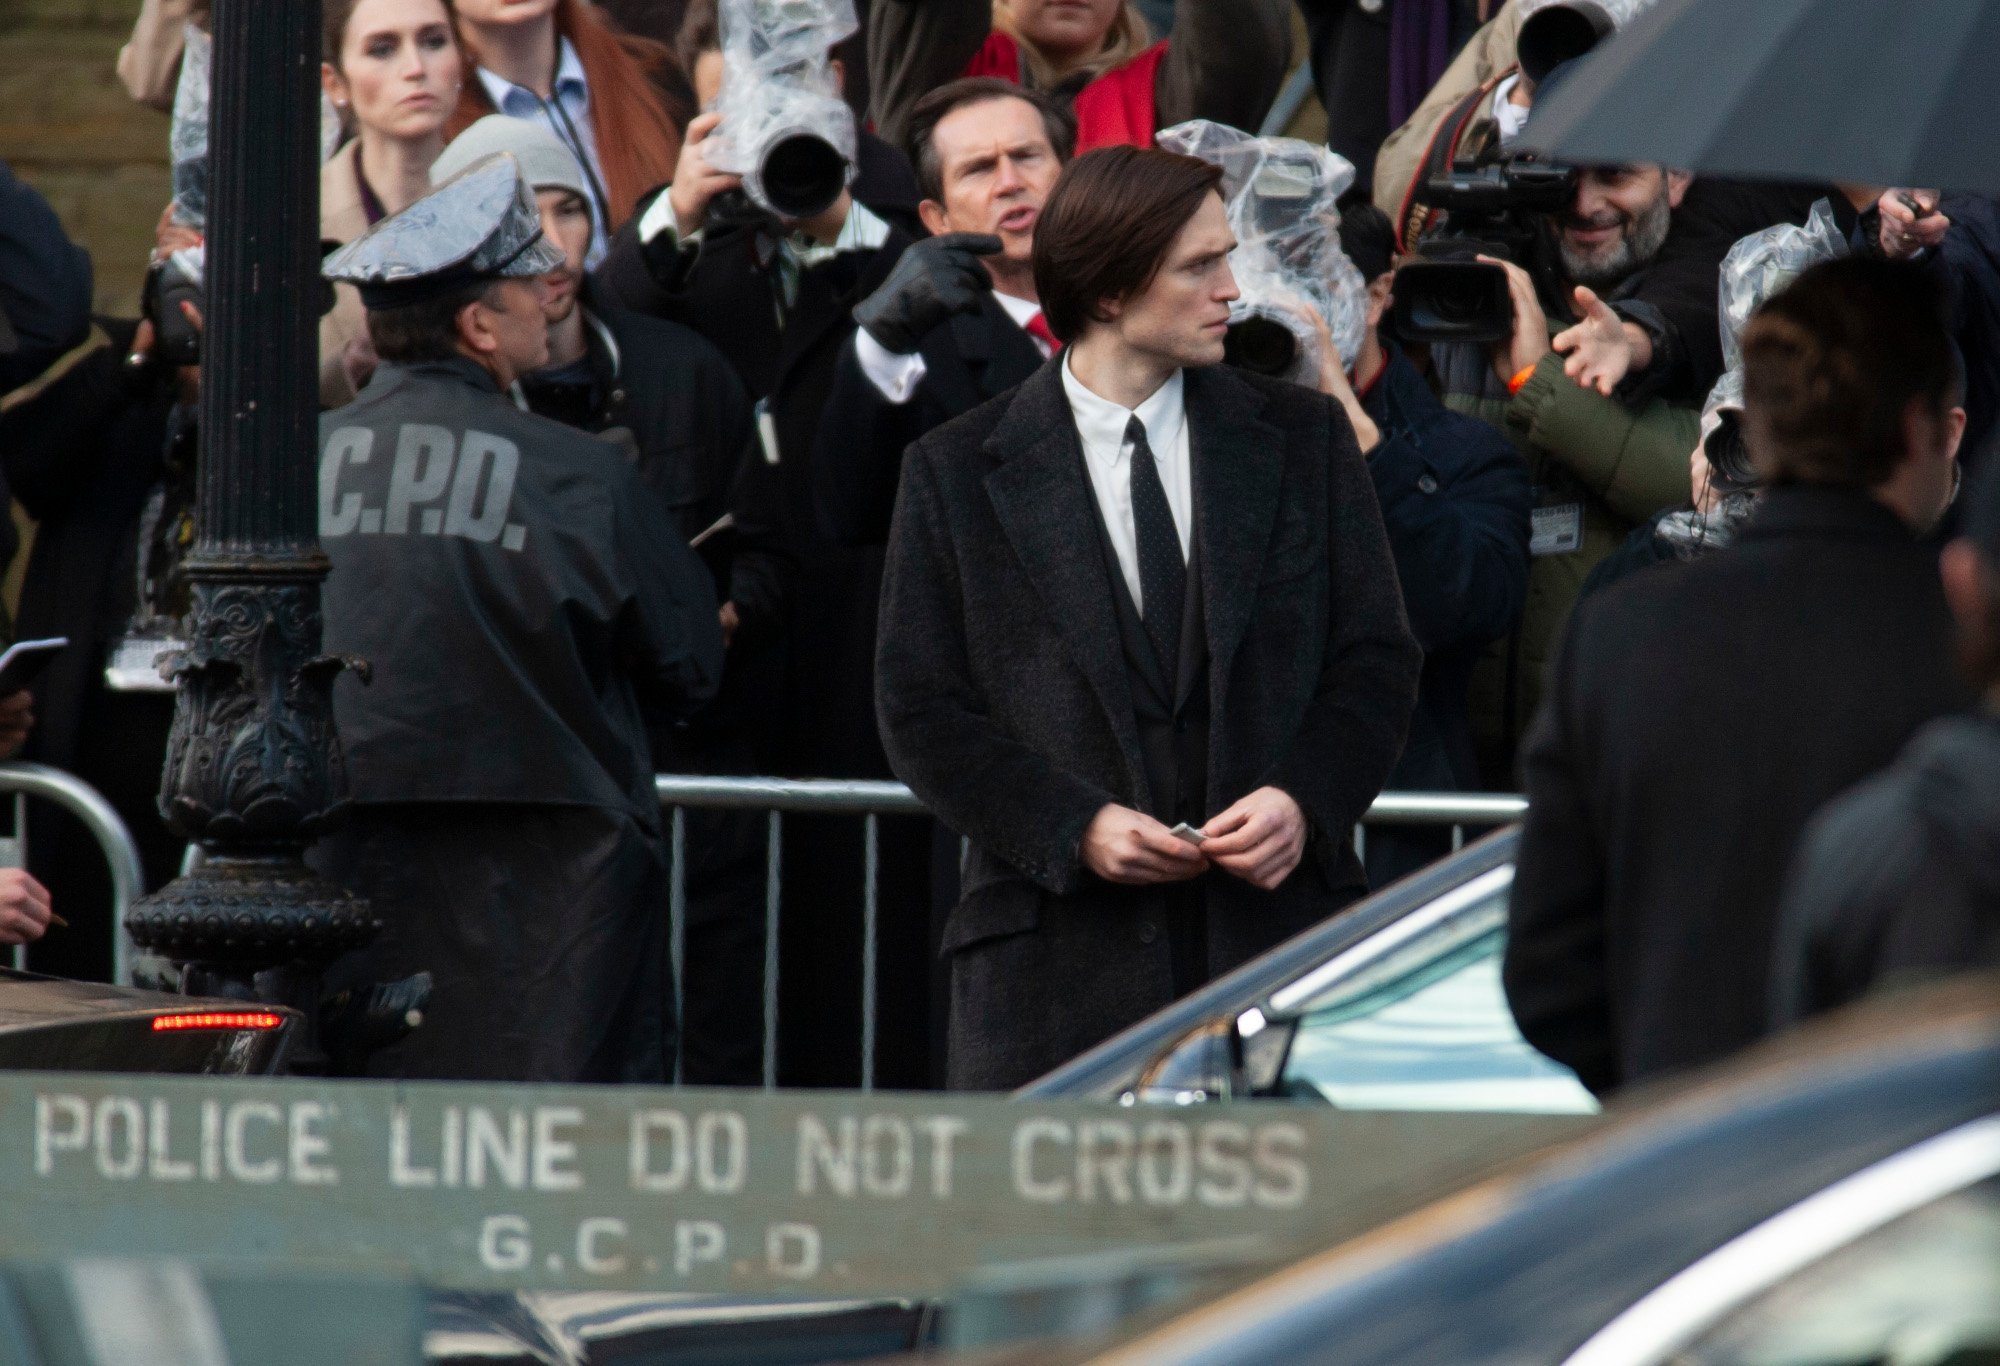 Robert Pattinson on the set of 'The Batman.' He's dressed as Bruce Wayne and surrounded by GCPD offfers and equipment.